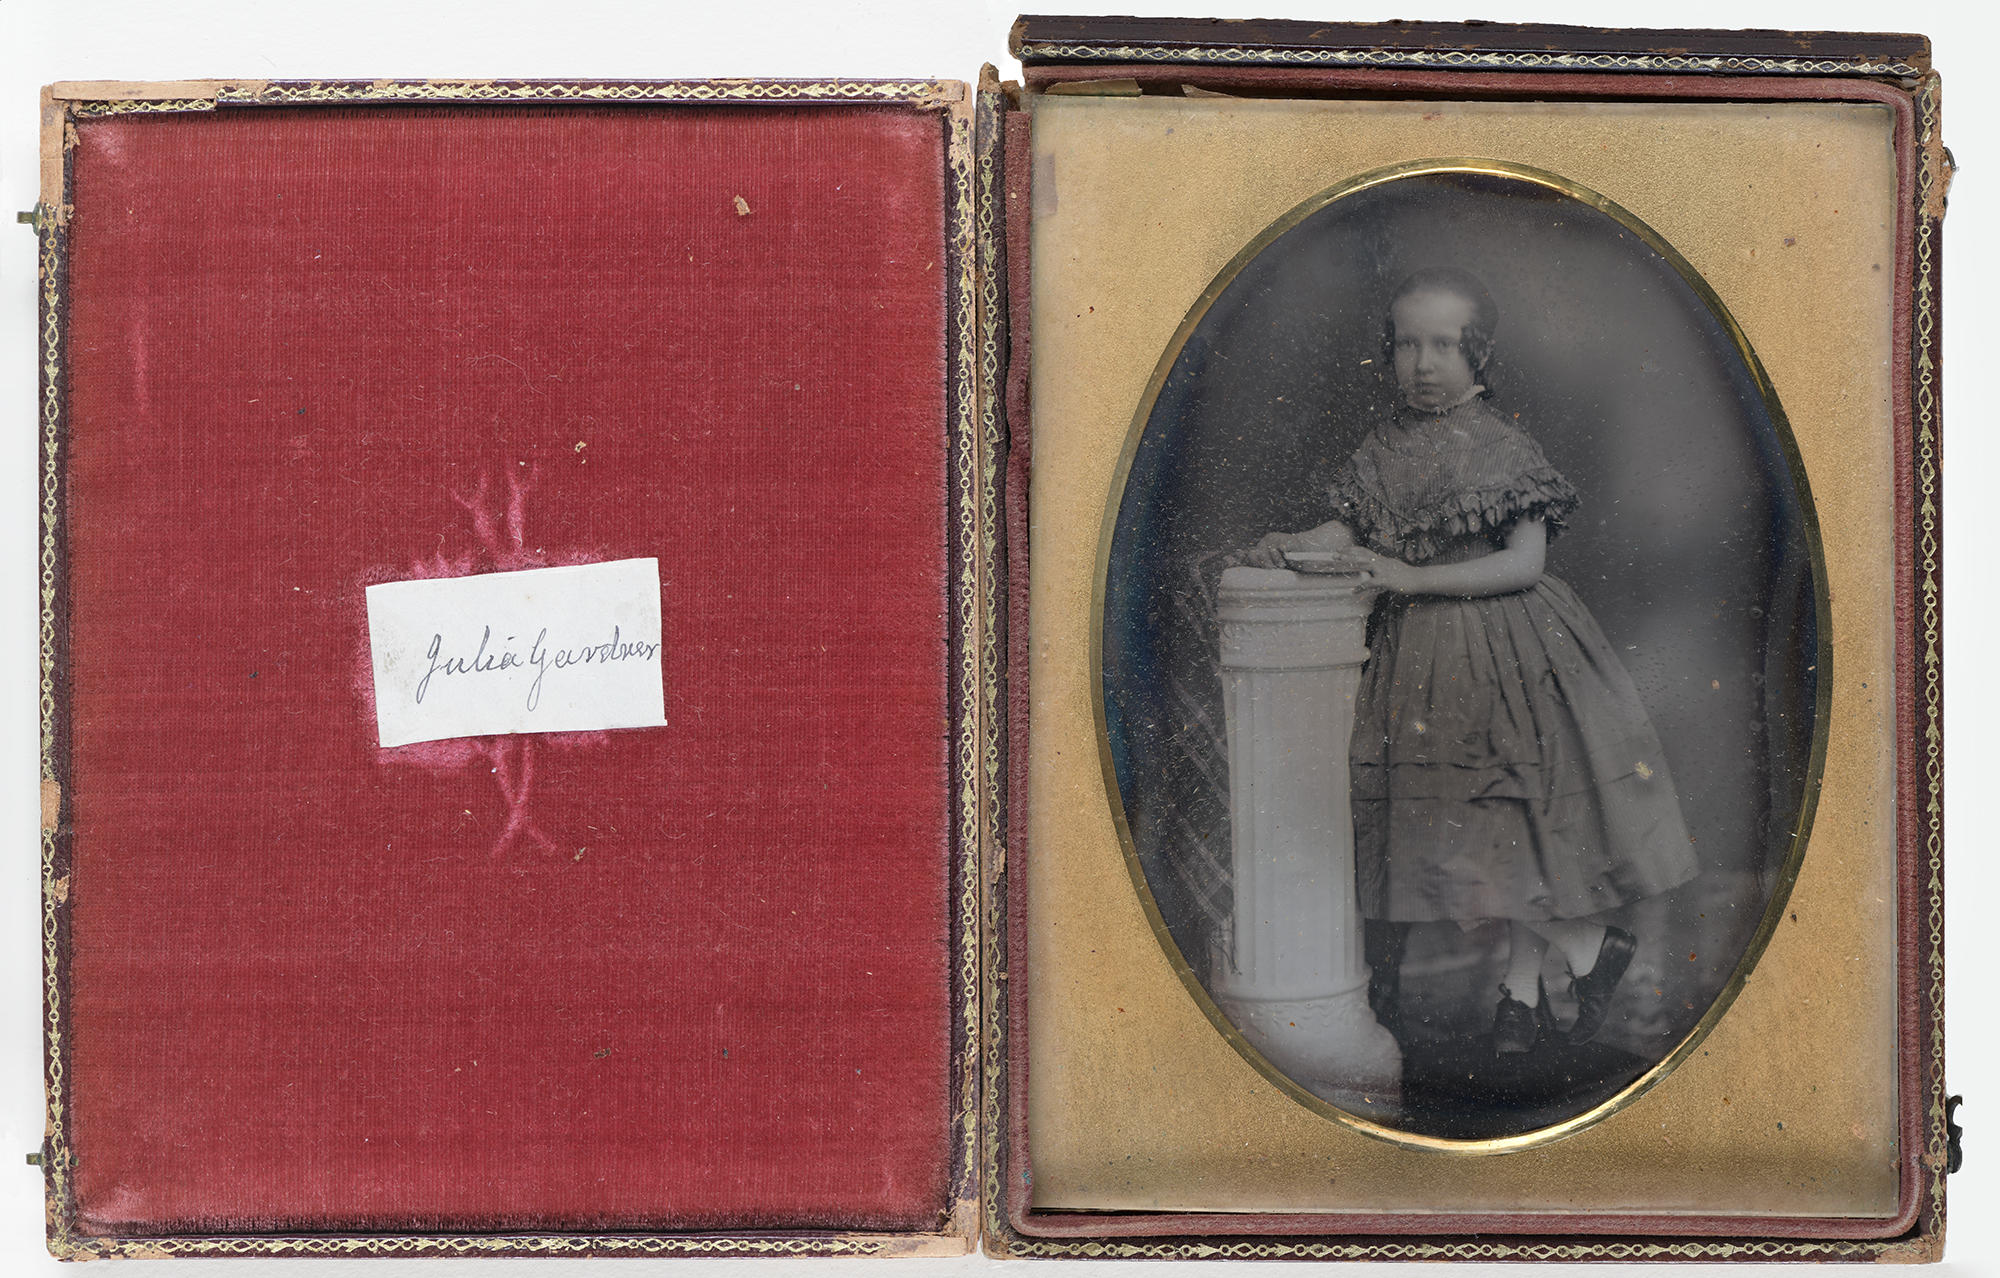 An open case lined with red velvet contains an oval black and white photograph of a girl about 9 years old identified as Julia Gardner. She is standing and wearing a 19th century dress and hairstyle.